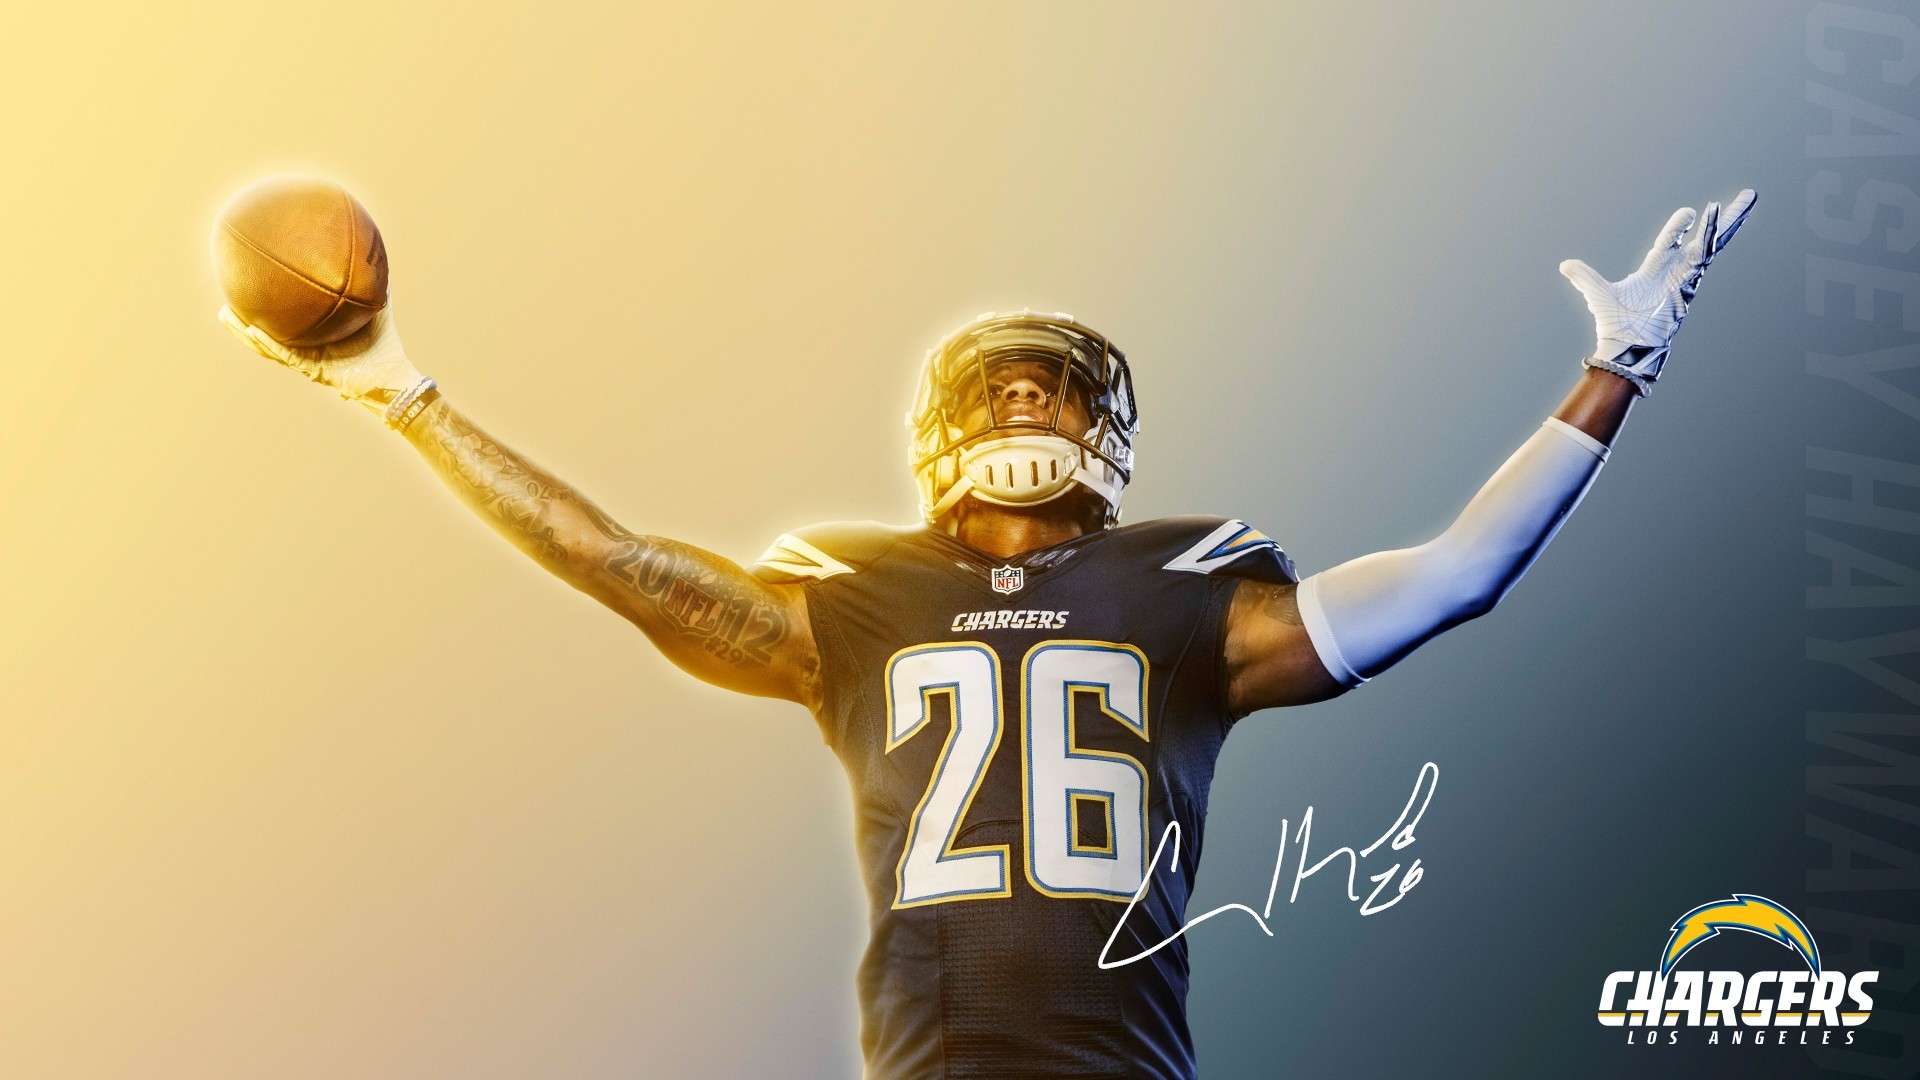 Chargers hd wallpaper download